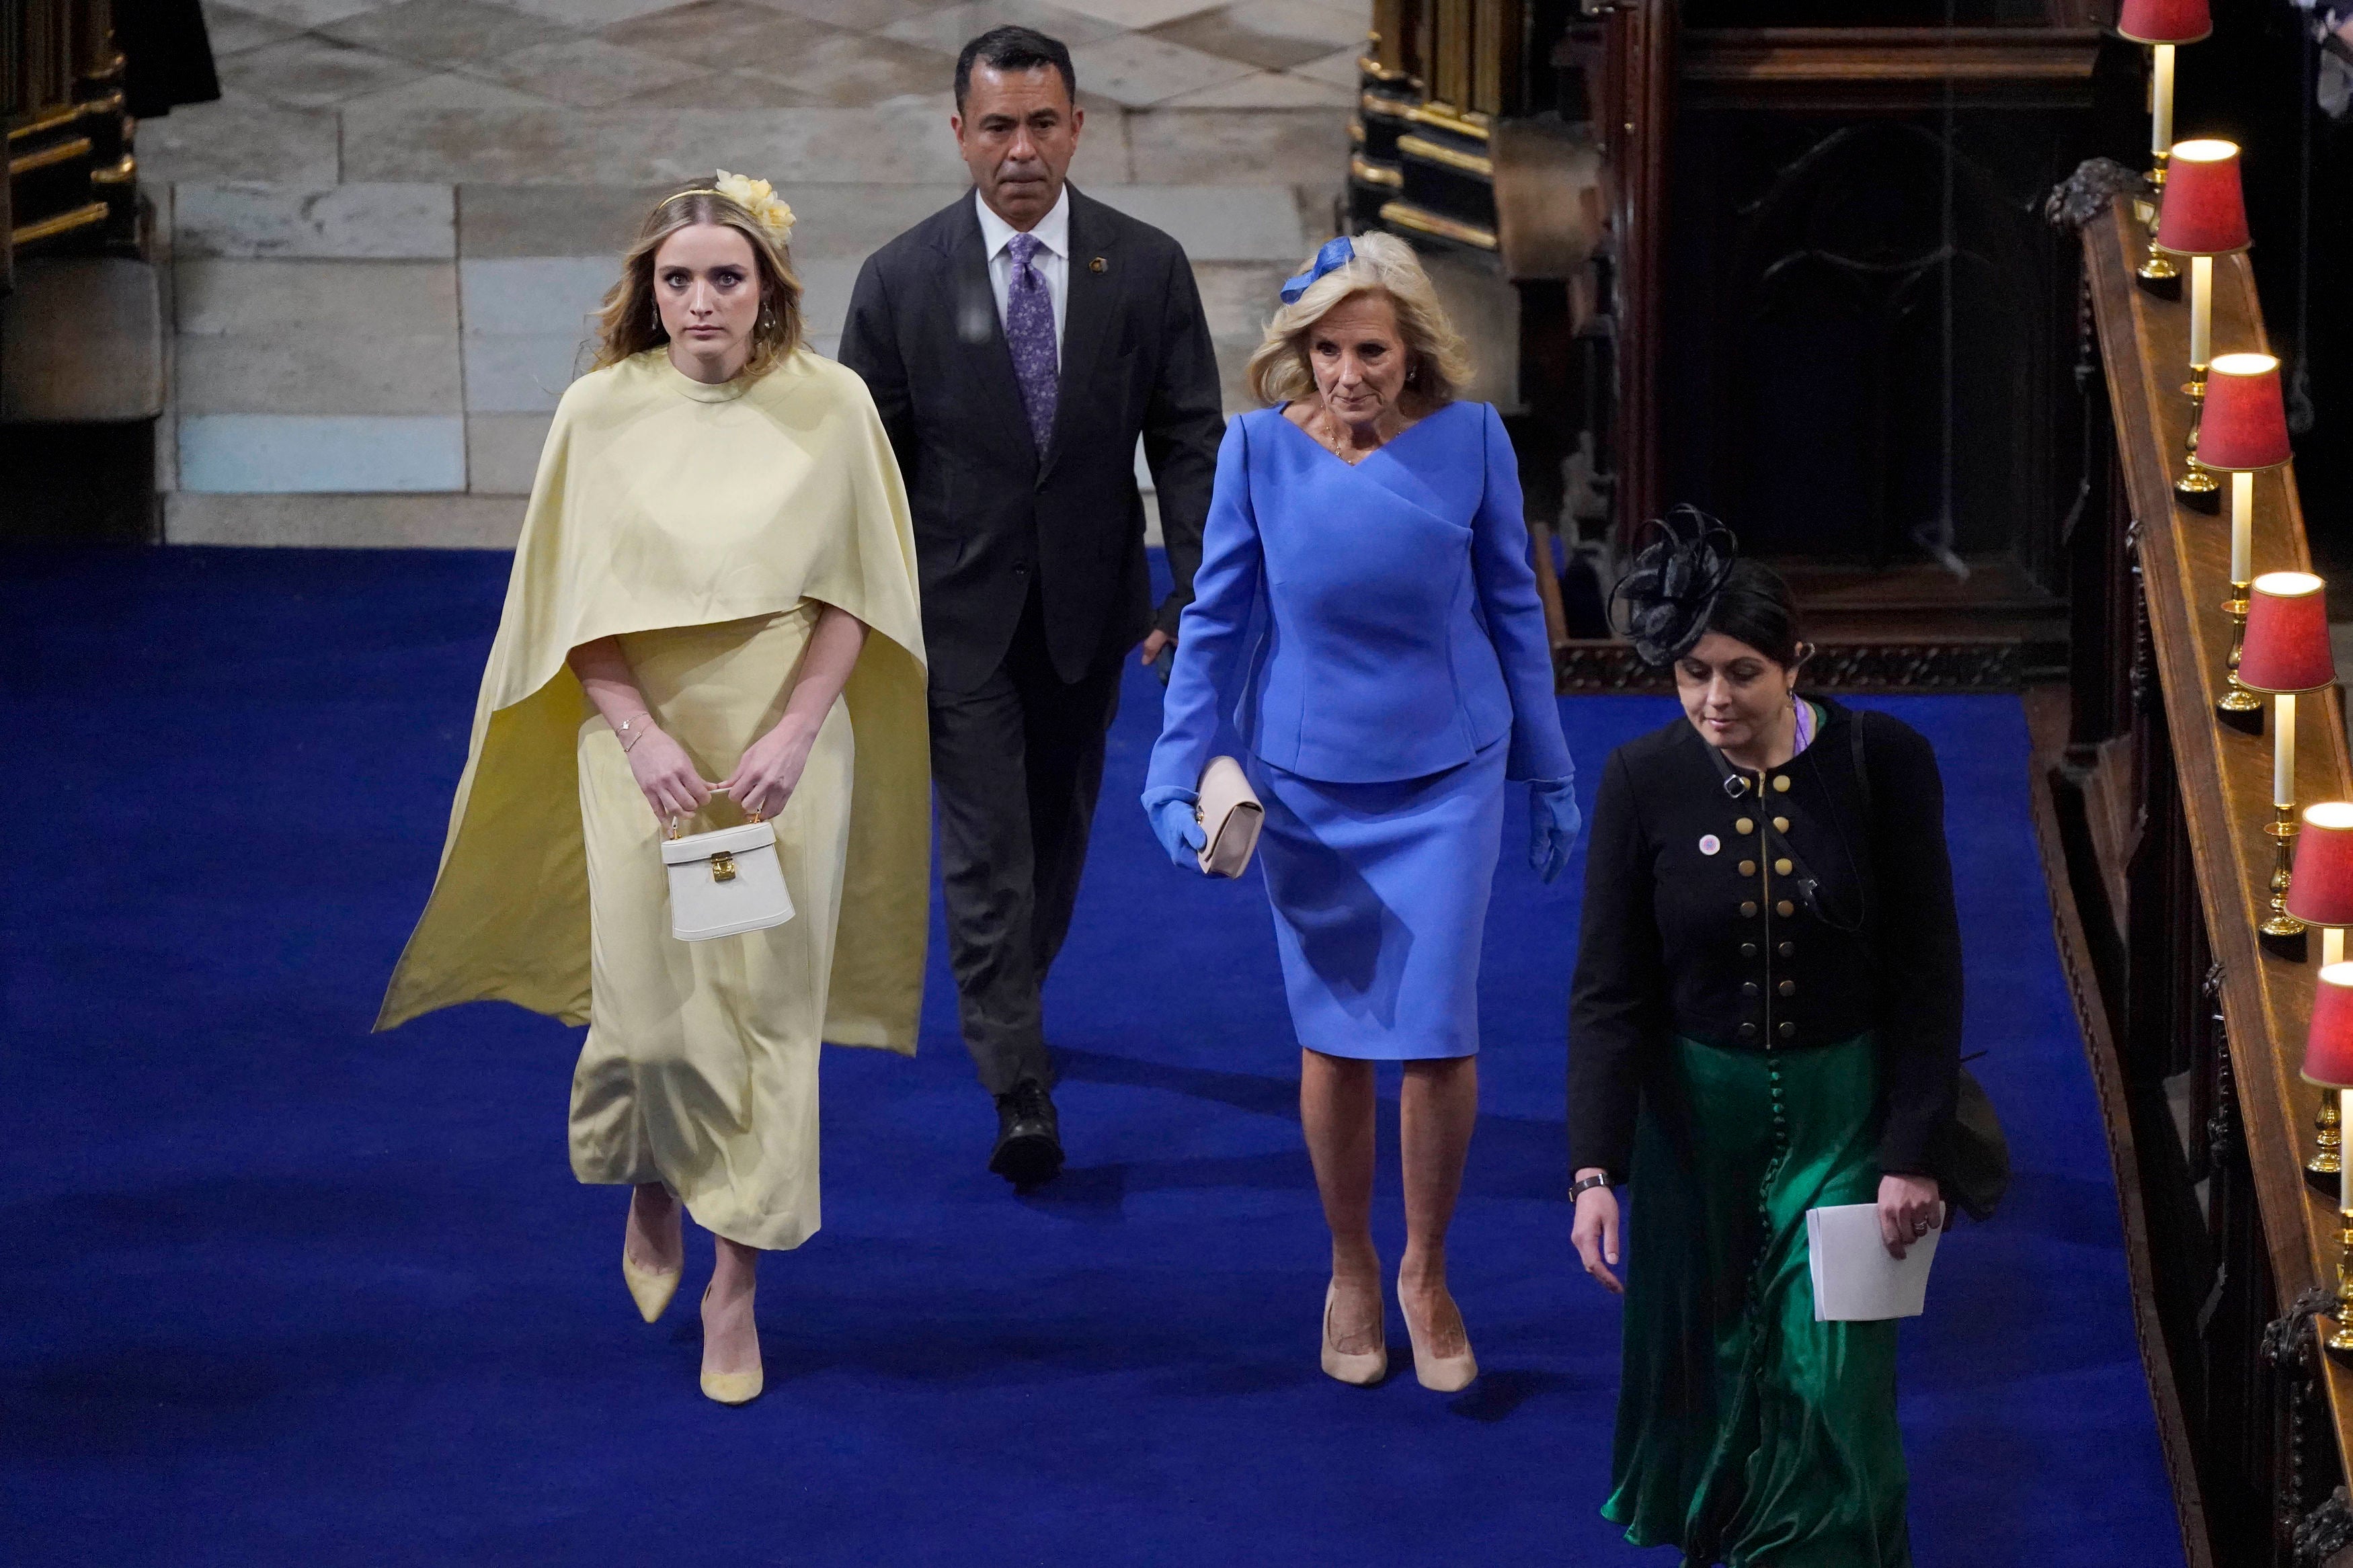 First Lady of the United States, Dr Jill Biden, and her grand daughter Finnegan Biden at the coronation of King Charles III and Queen Camilla at Westminster Abbey